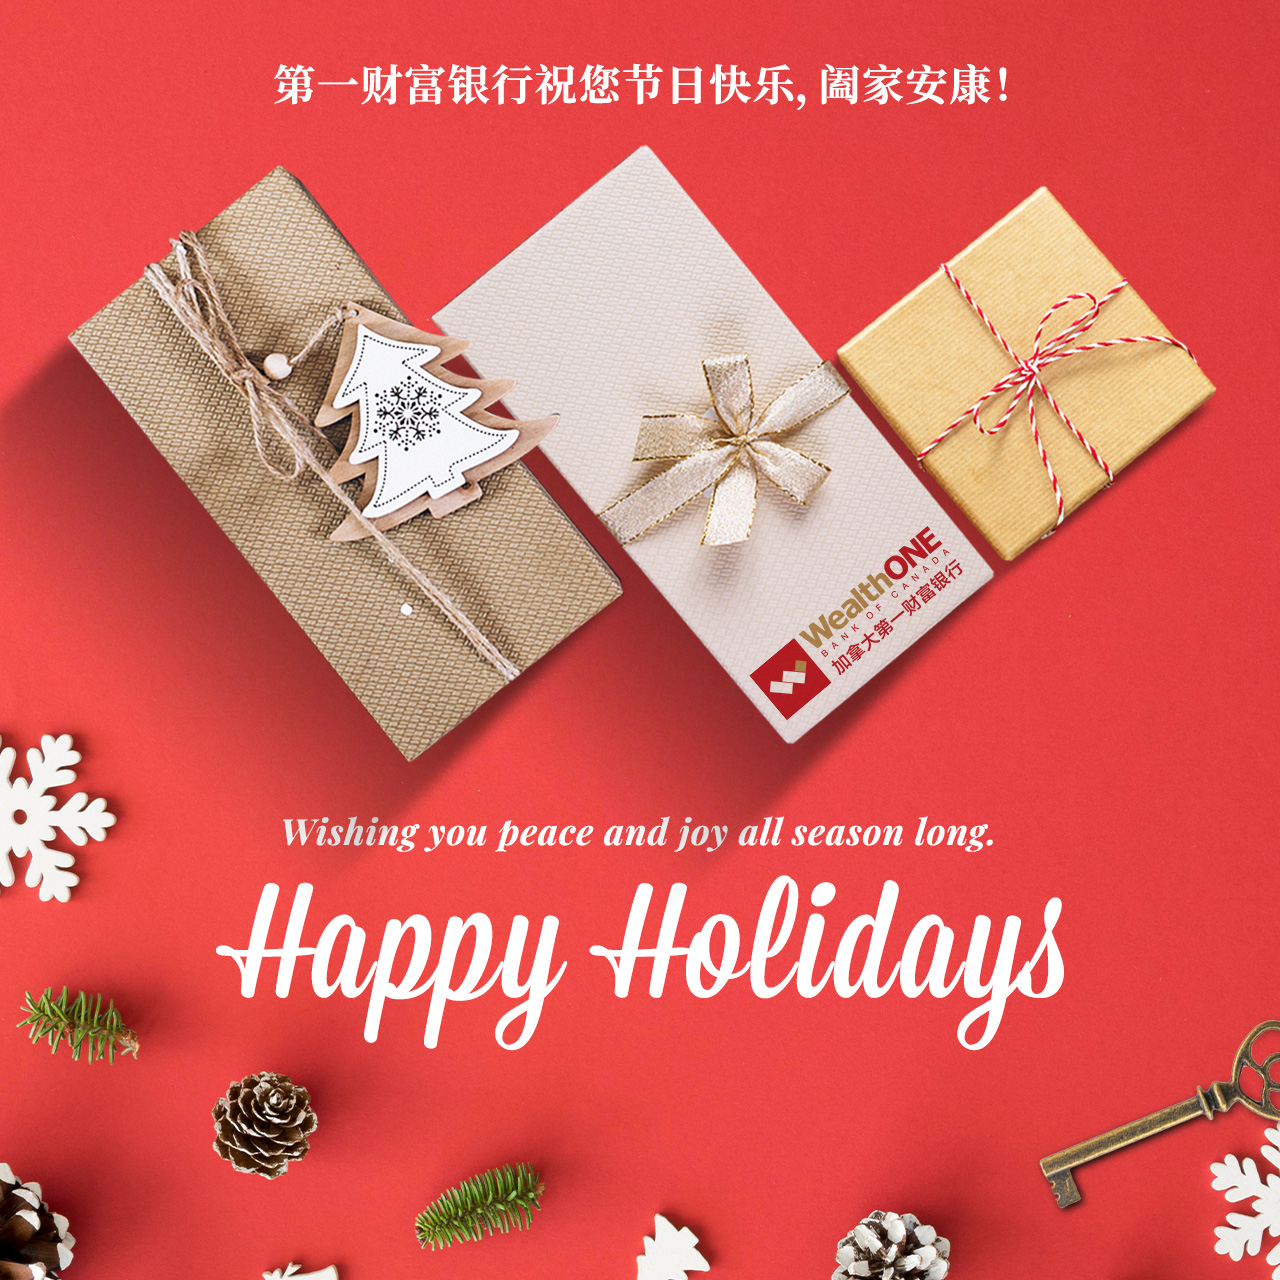 WealthONE wishes you a happy holiday season